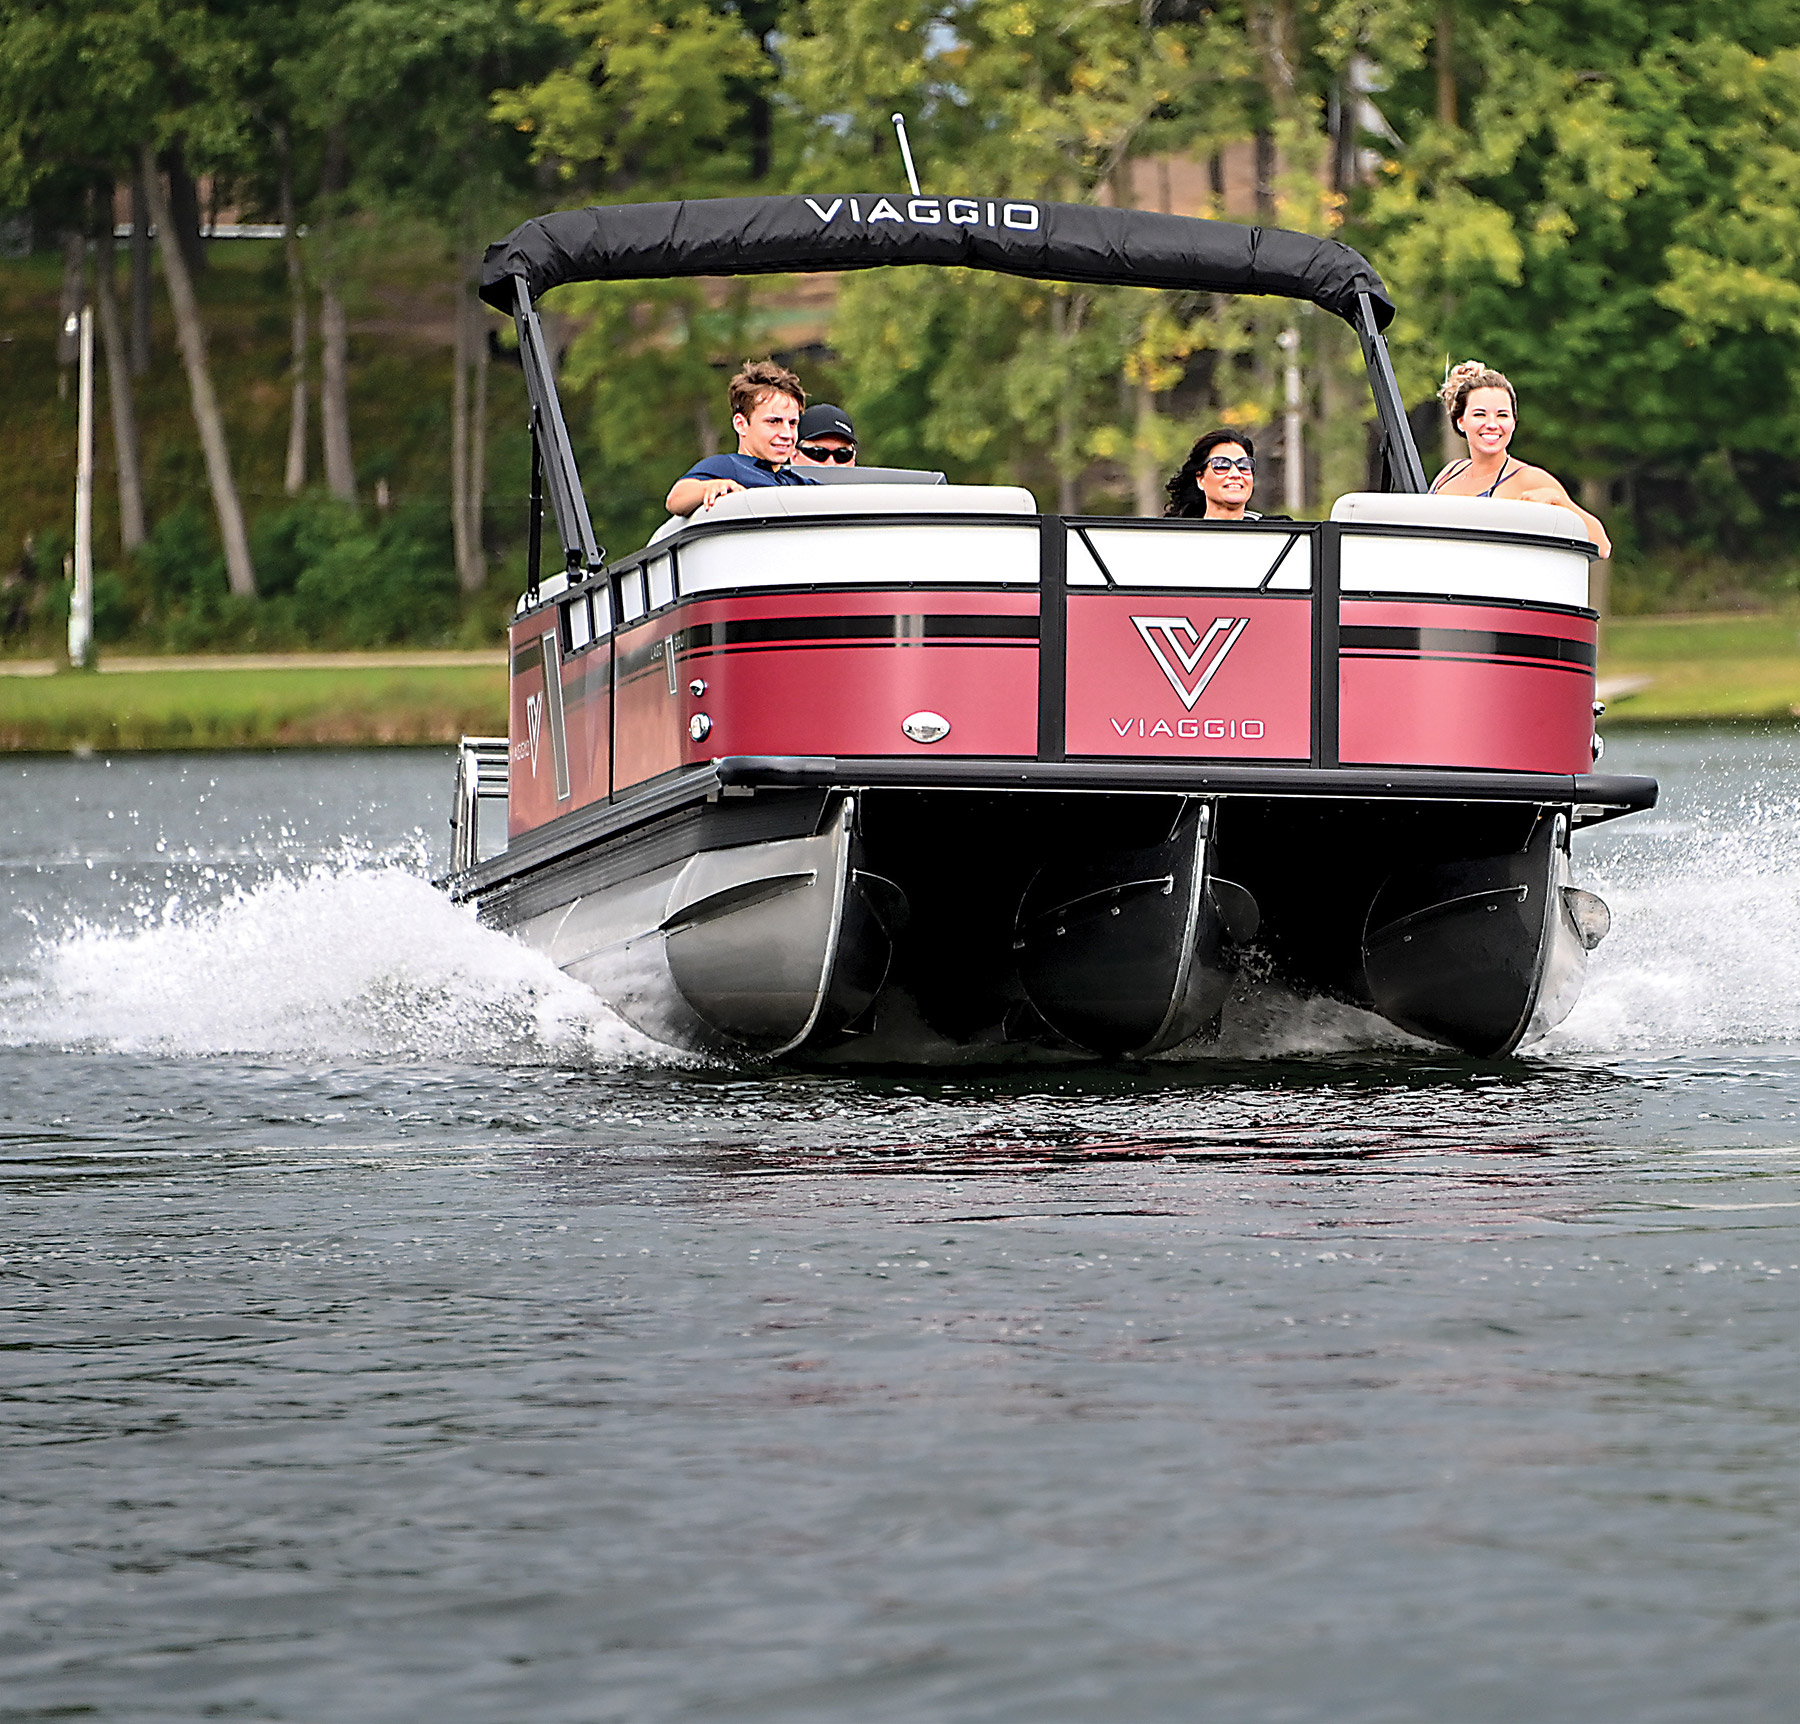 A landscape front photograph view of the Viaggio Lago 20U boat in red, black and grey cruising in the water outdoors with two guys and two girls inside smiling and enjoying a good time